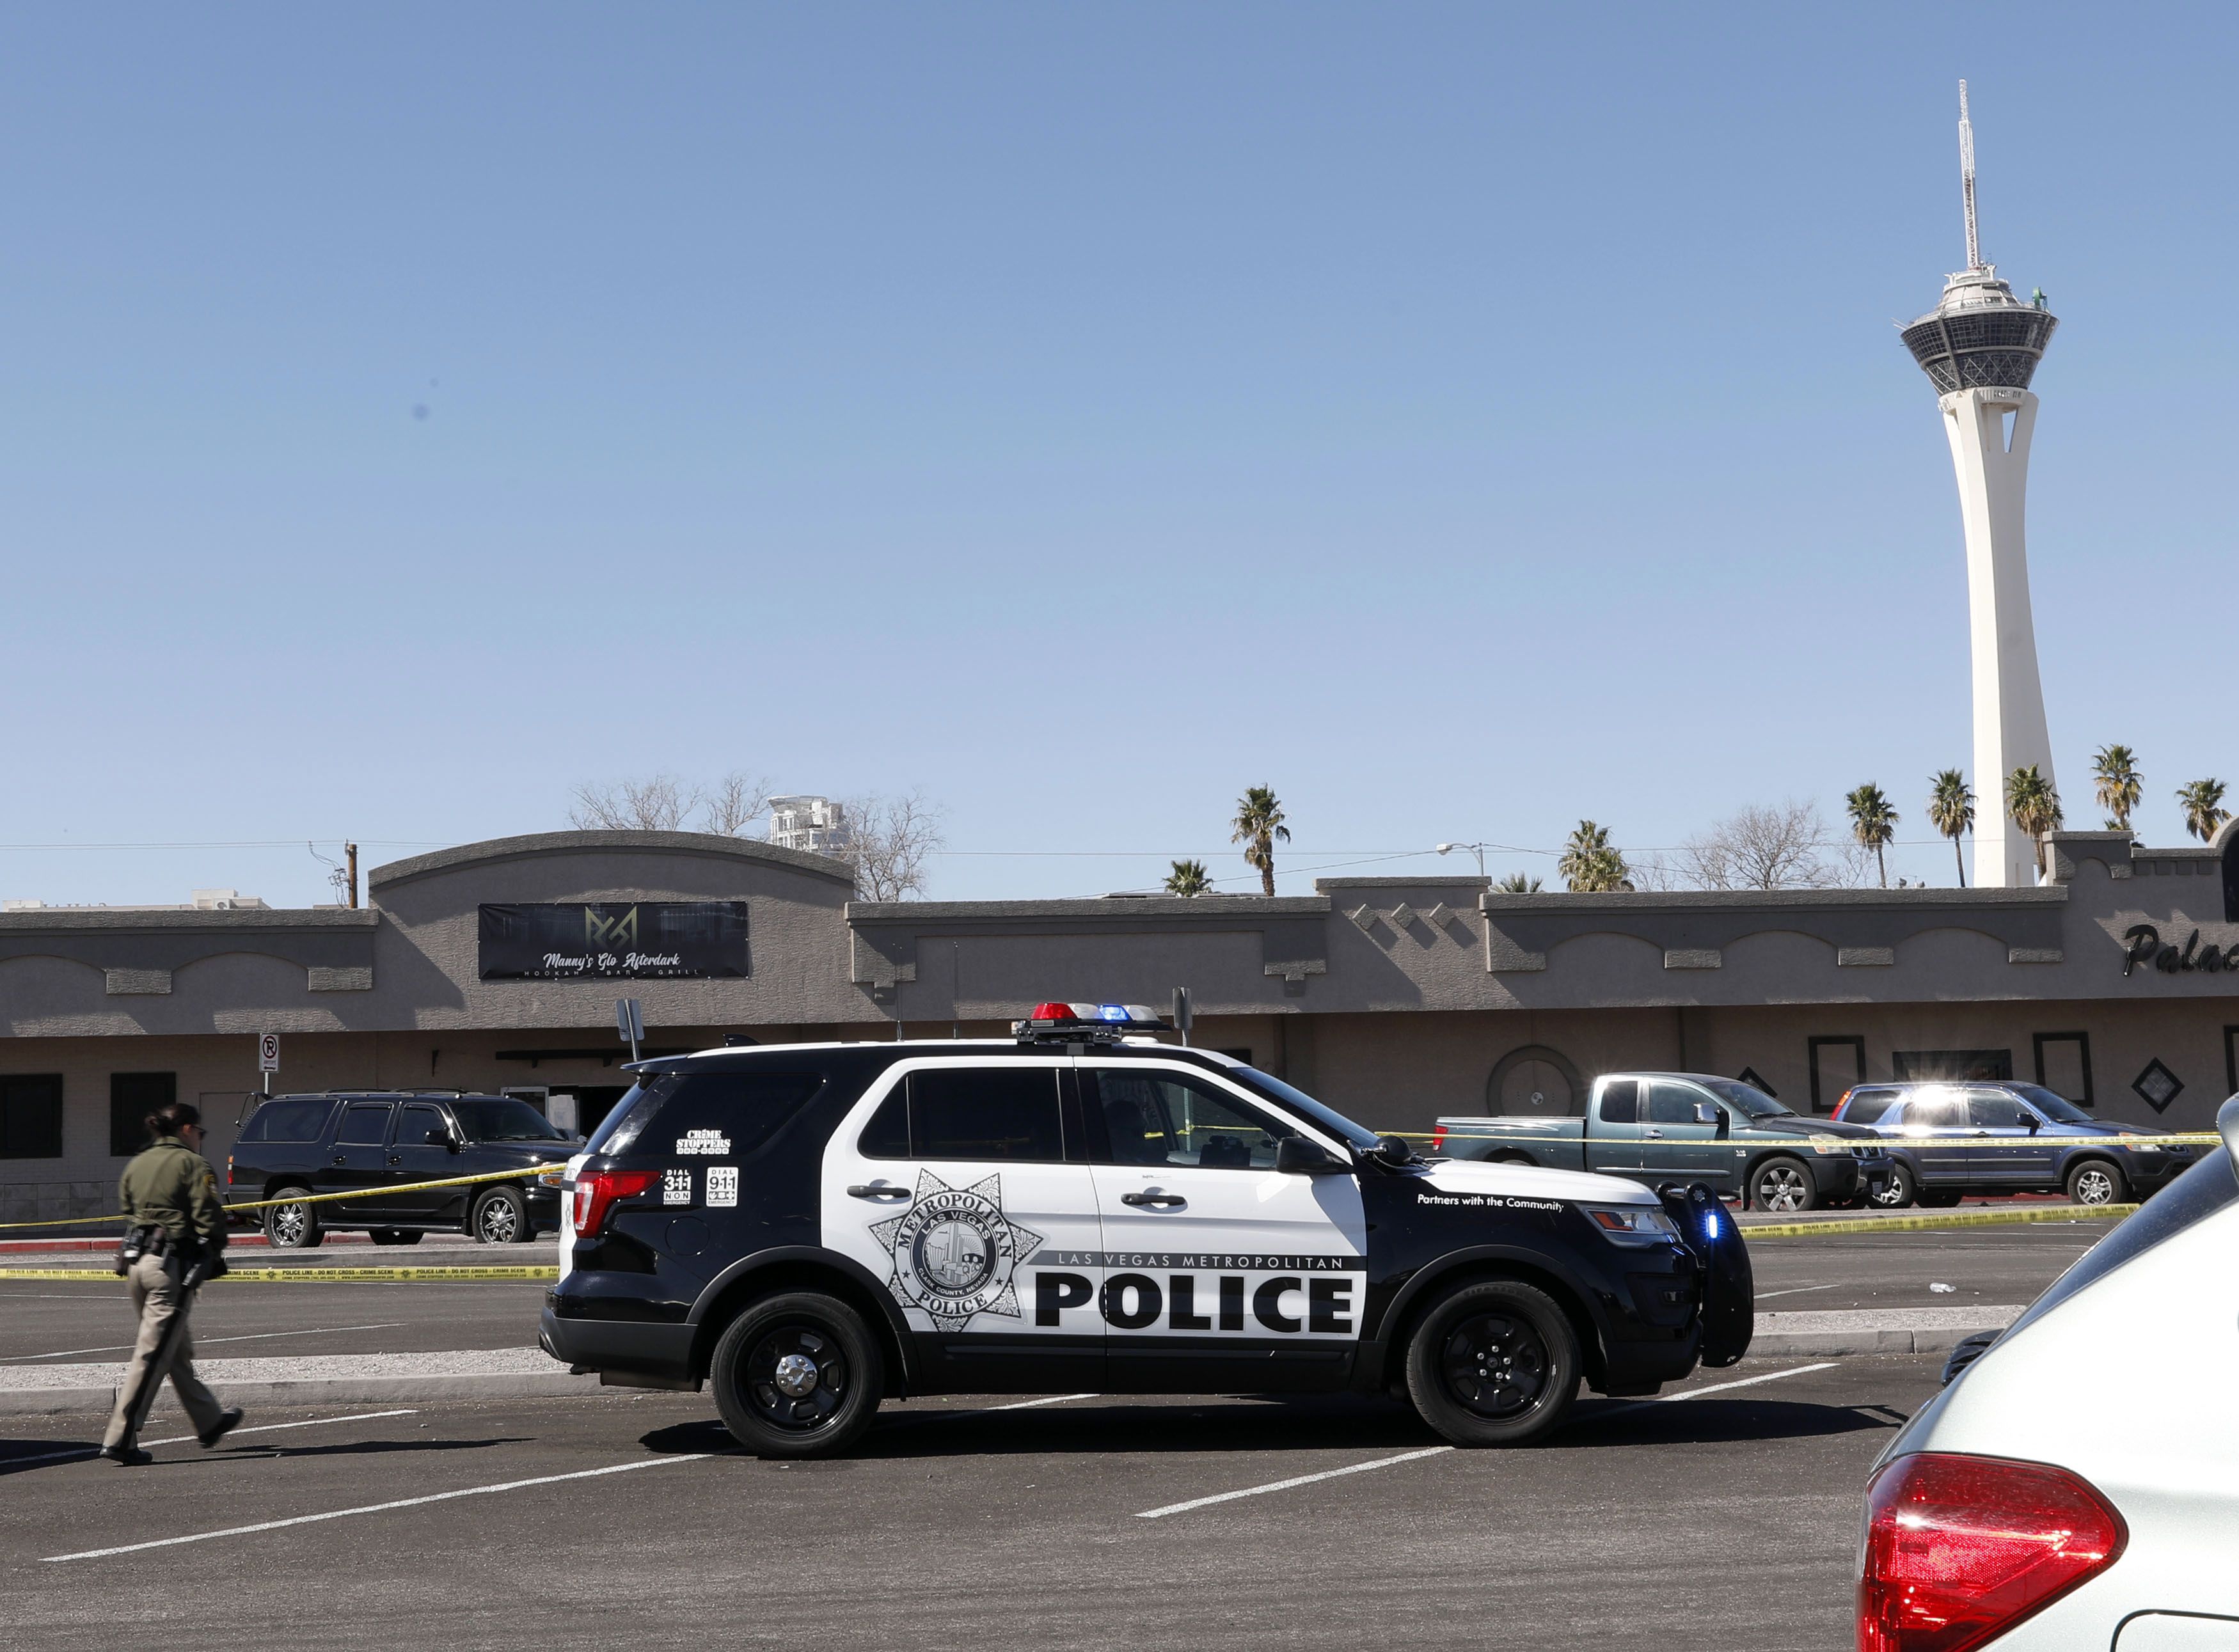 Las Vegas police investigate at Manny's Glow Ultra Lounge & Restaurant, after a shooting, Saturday, Feb. 26, 2022, in Las Vegas. Multiple people were shot before dawn Saturday morning at a hookah parlor. (Chitose Suzuki/Las Vegas Review-Journal via AP)